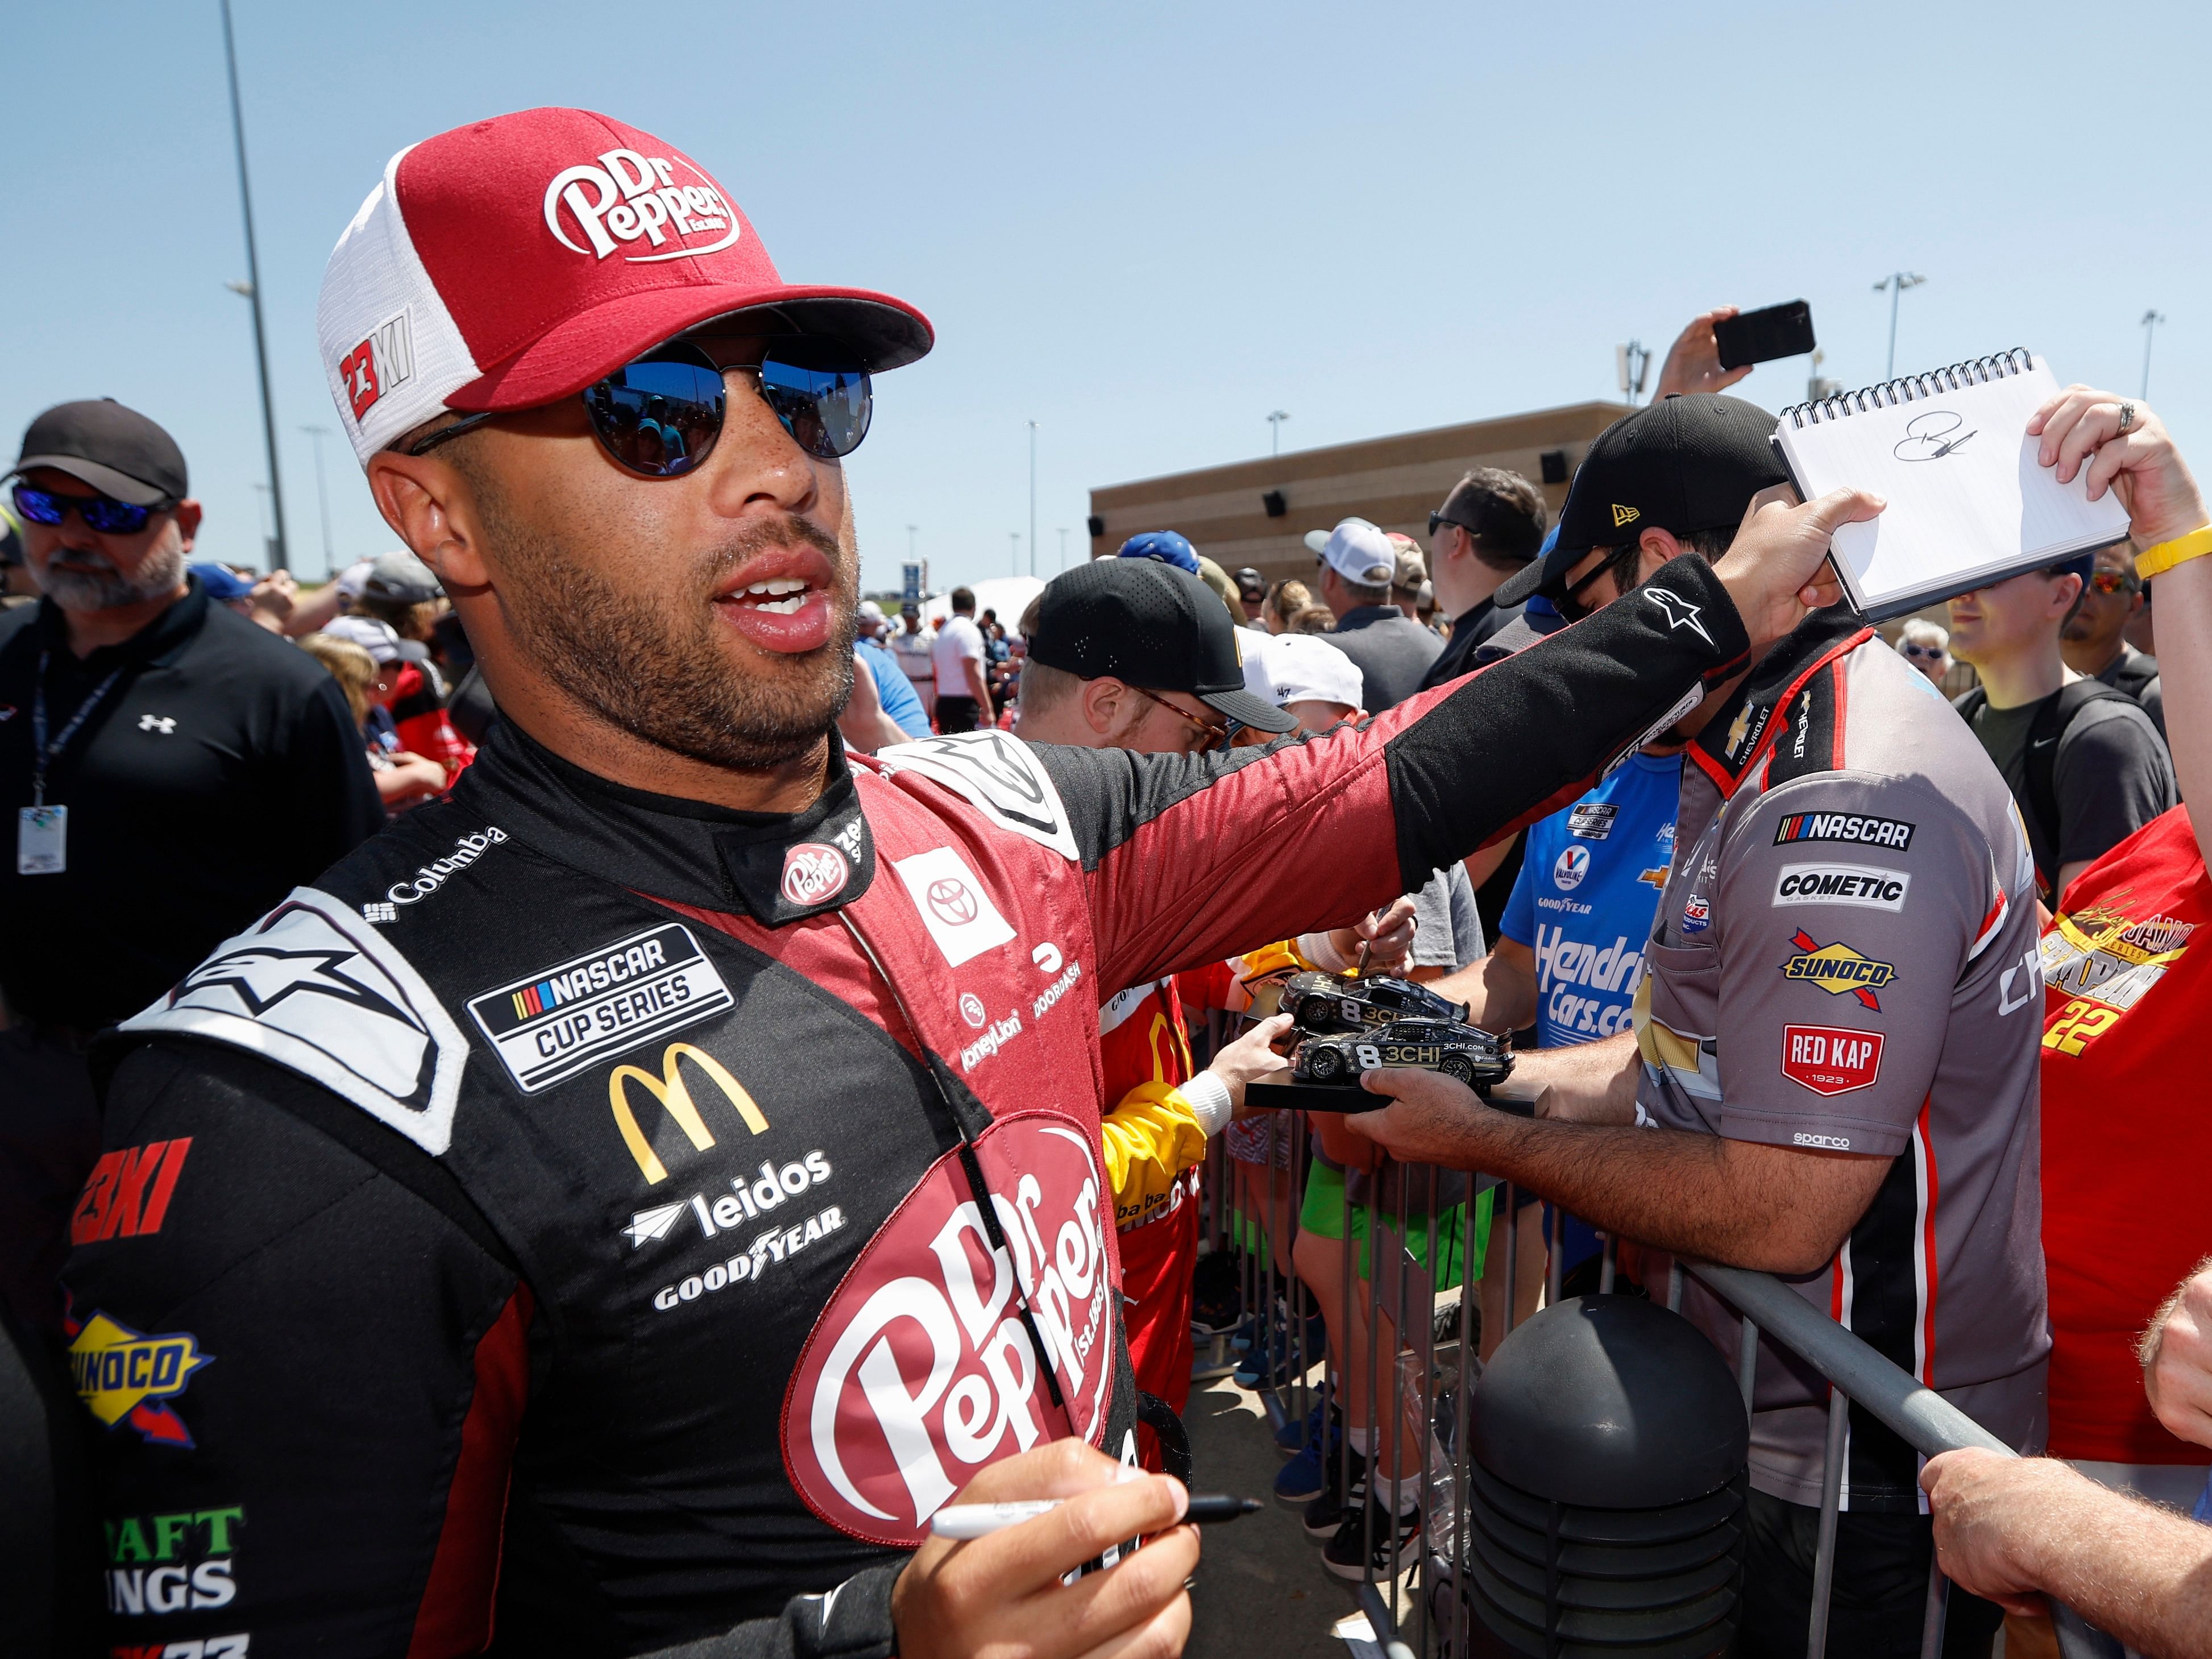 Bubba Wallace prior to the 2023 NASCAR Cup Series Advent Health 400 at Kansas Speedway in Kansas City, Kansas. (Photo by Sean Gardner/Getty Images)